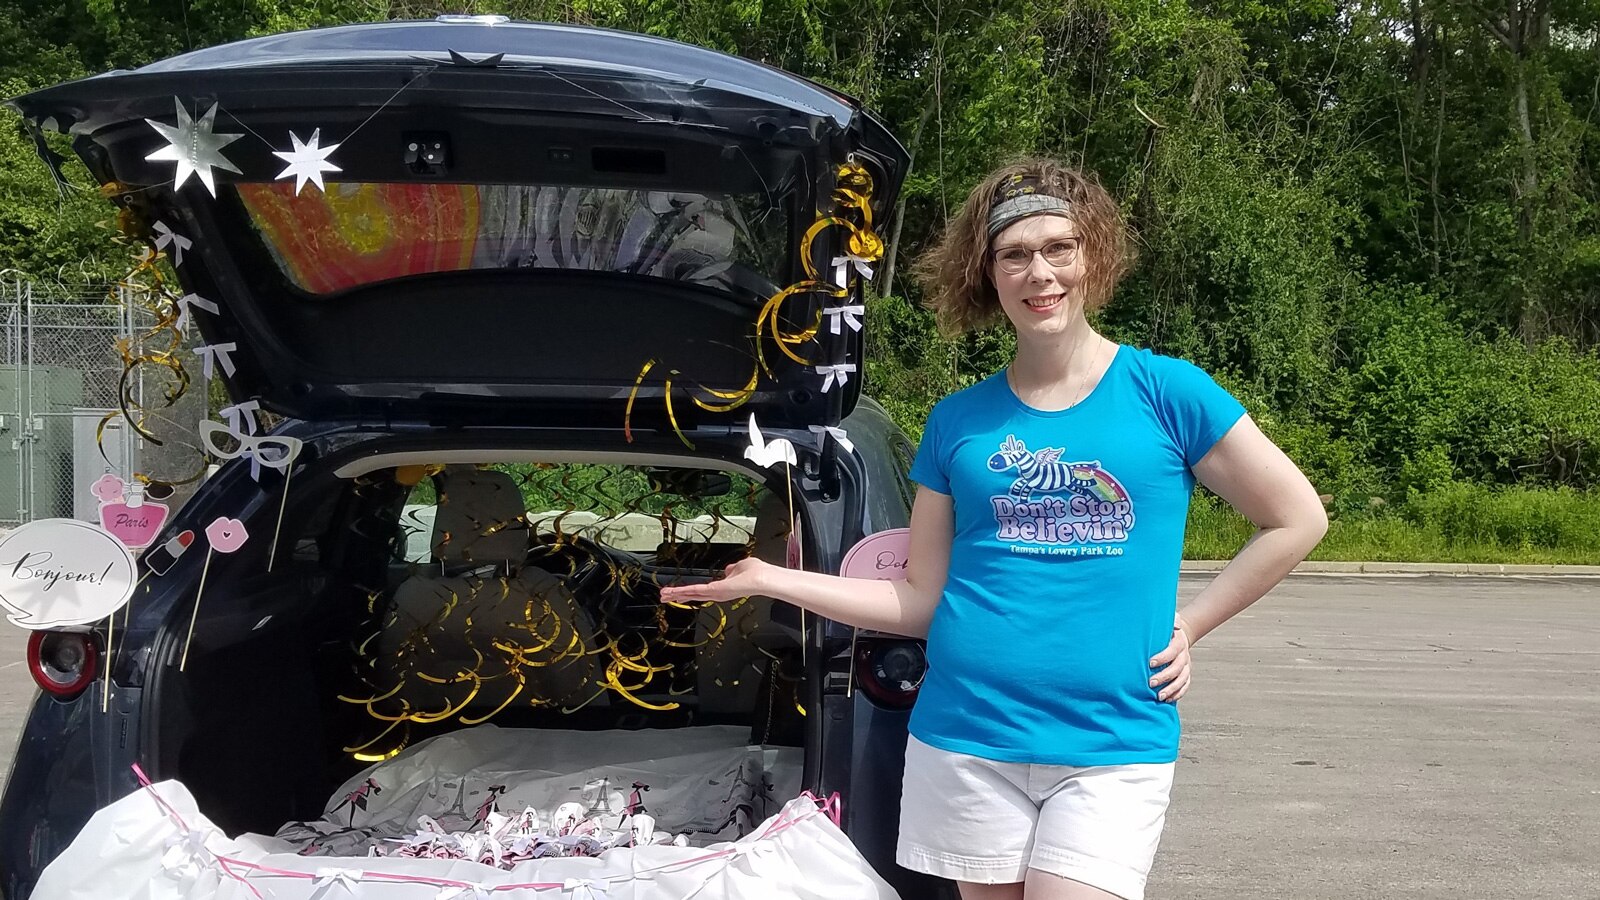 Melissa decorated a car and handed out goodies at the Make-A-Wish Wish Fest in Nashville April 30.